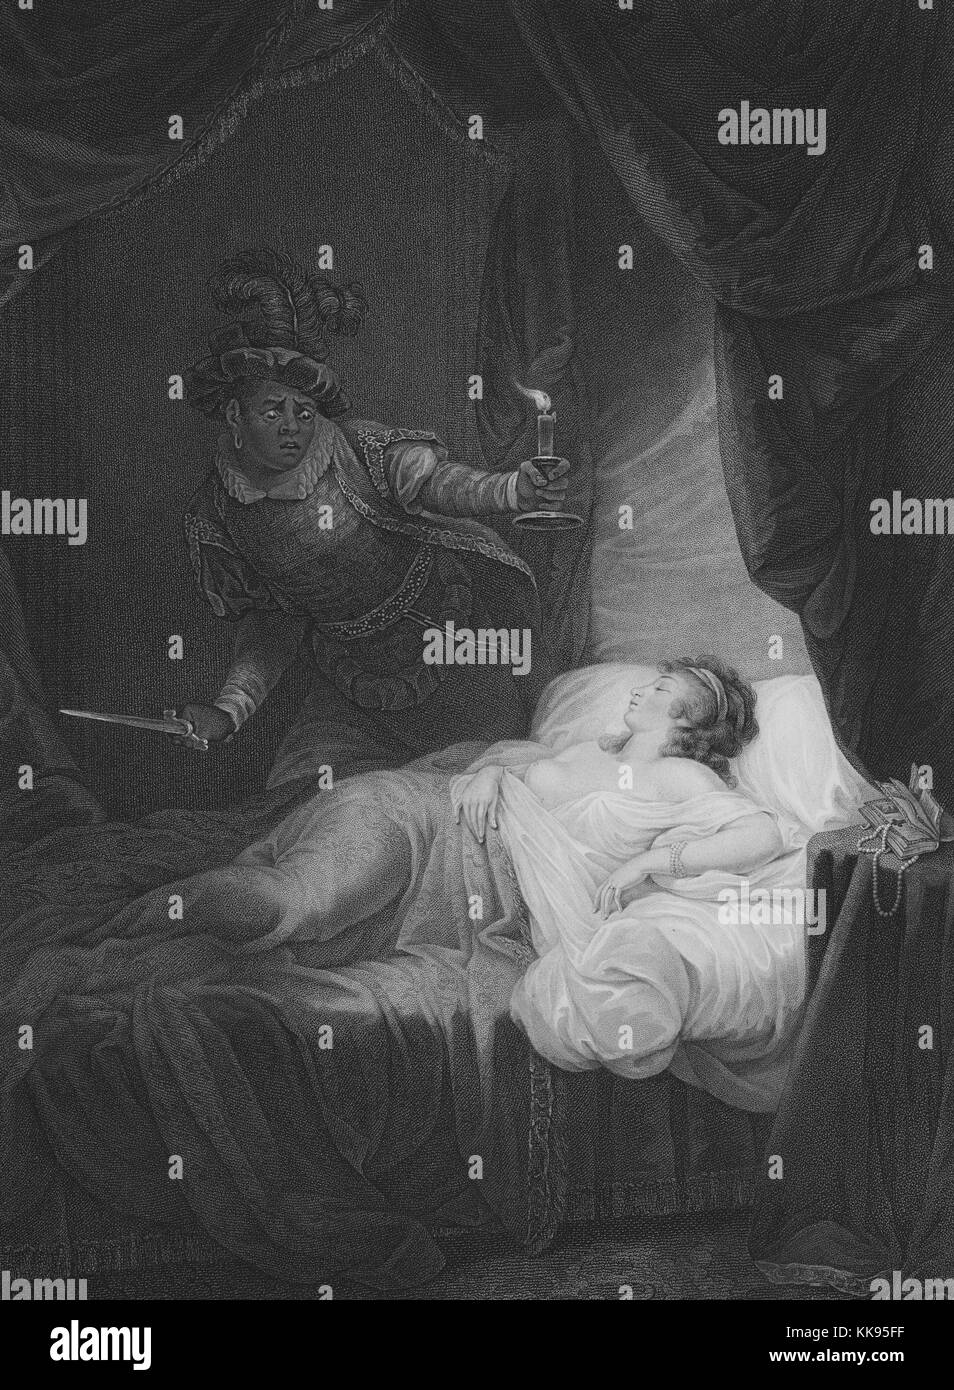 Illustration titled 'A Bedchamber, Desdemona in Bed asleep', from Othello (Act V, scene 2), part of 'A Collection of Prints, from Pictures Painted for the Purpose of Illustrating the Dramatic Works of Shakespeare, by the Artists of Great-Britain', 1799. From the New York Public Library. Stock Photo